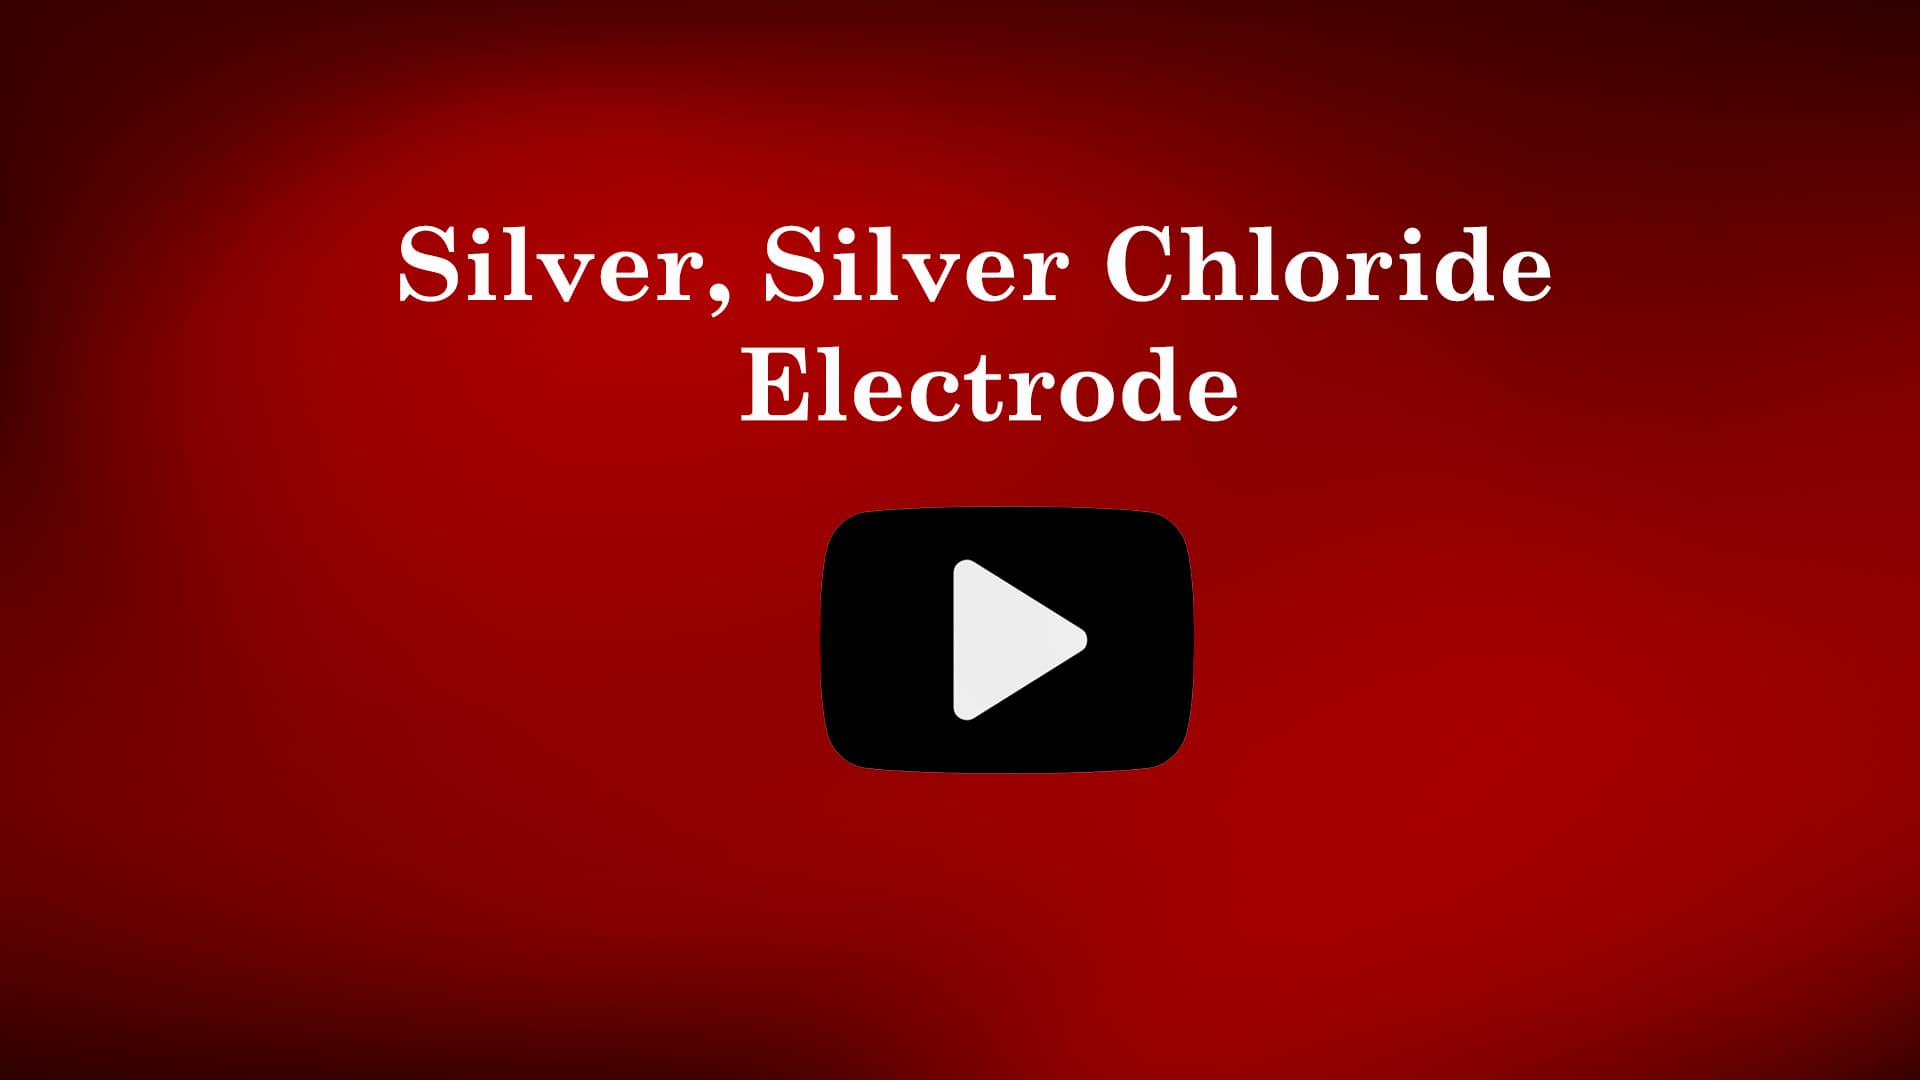 Silver/Silver Chloride (Ag/AgCl) Electrode - Construction & Working | VTU Engineering Chemistry